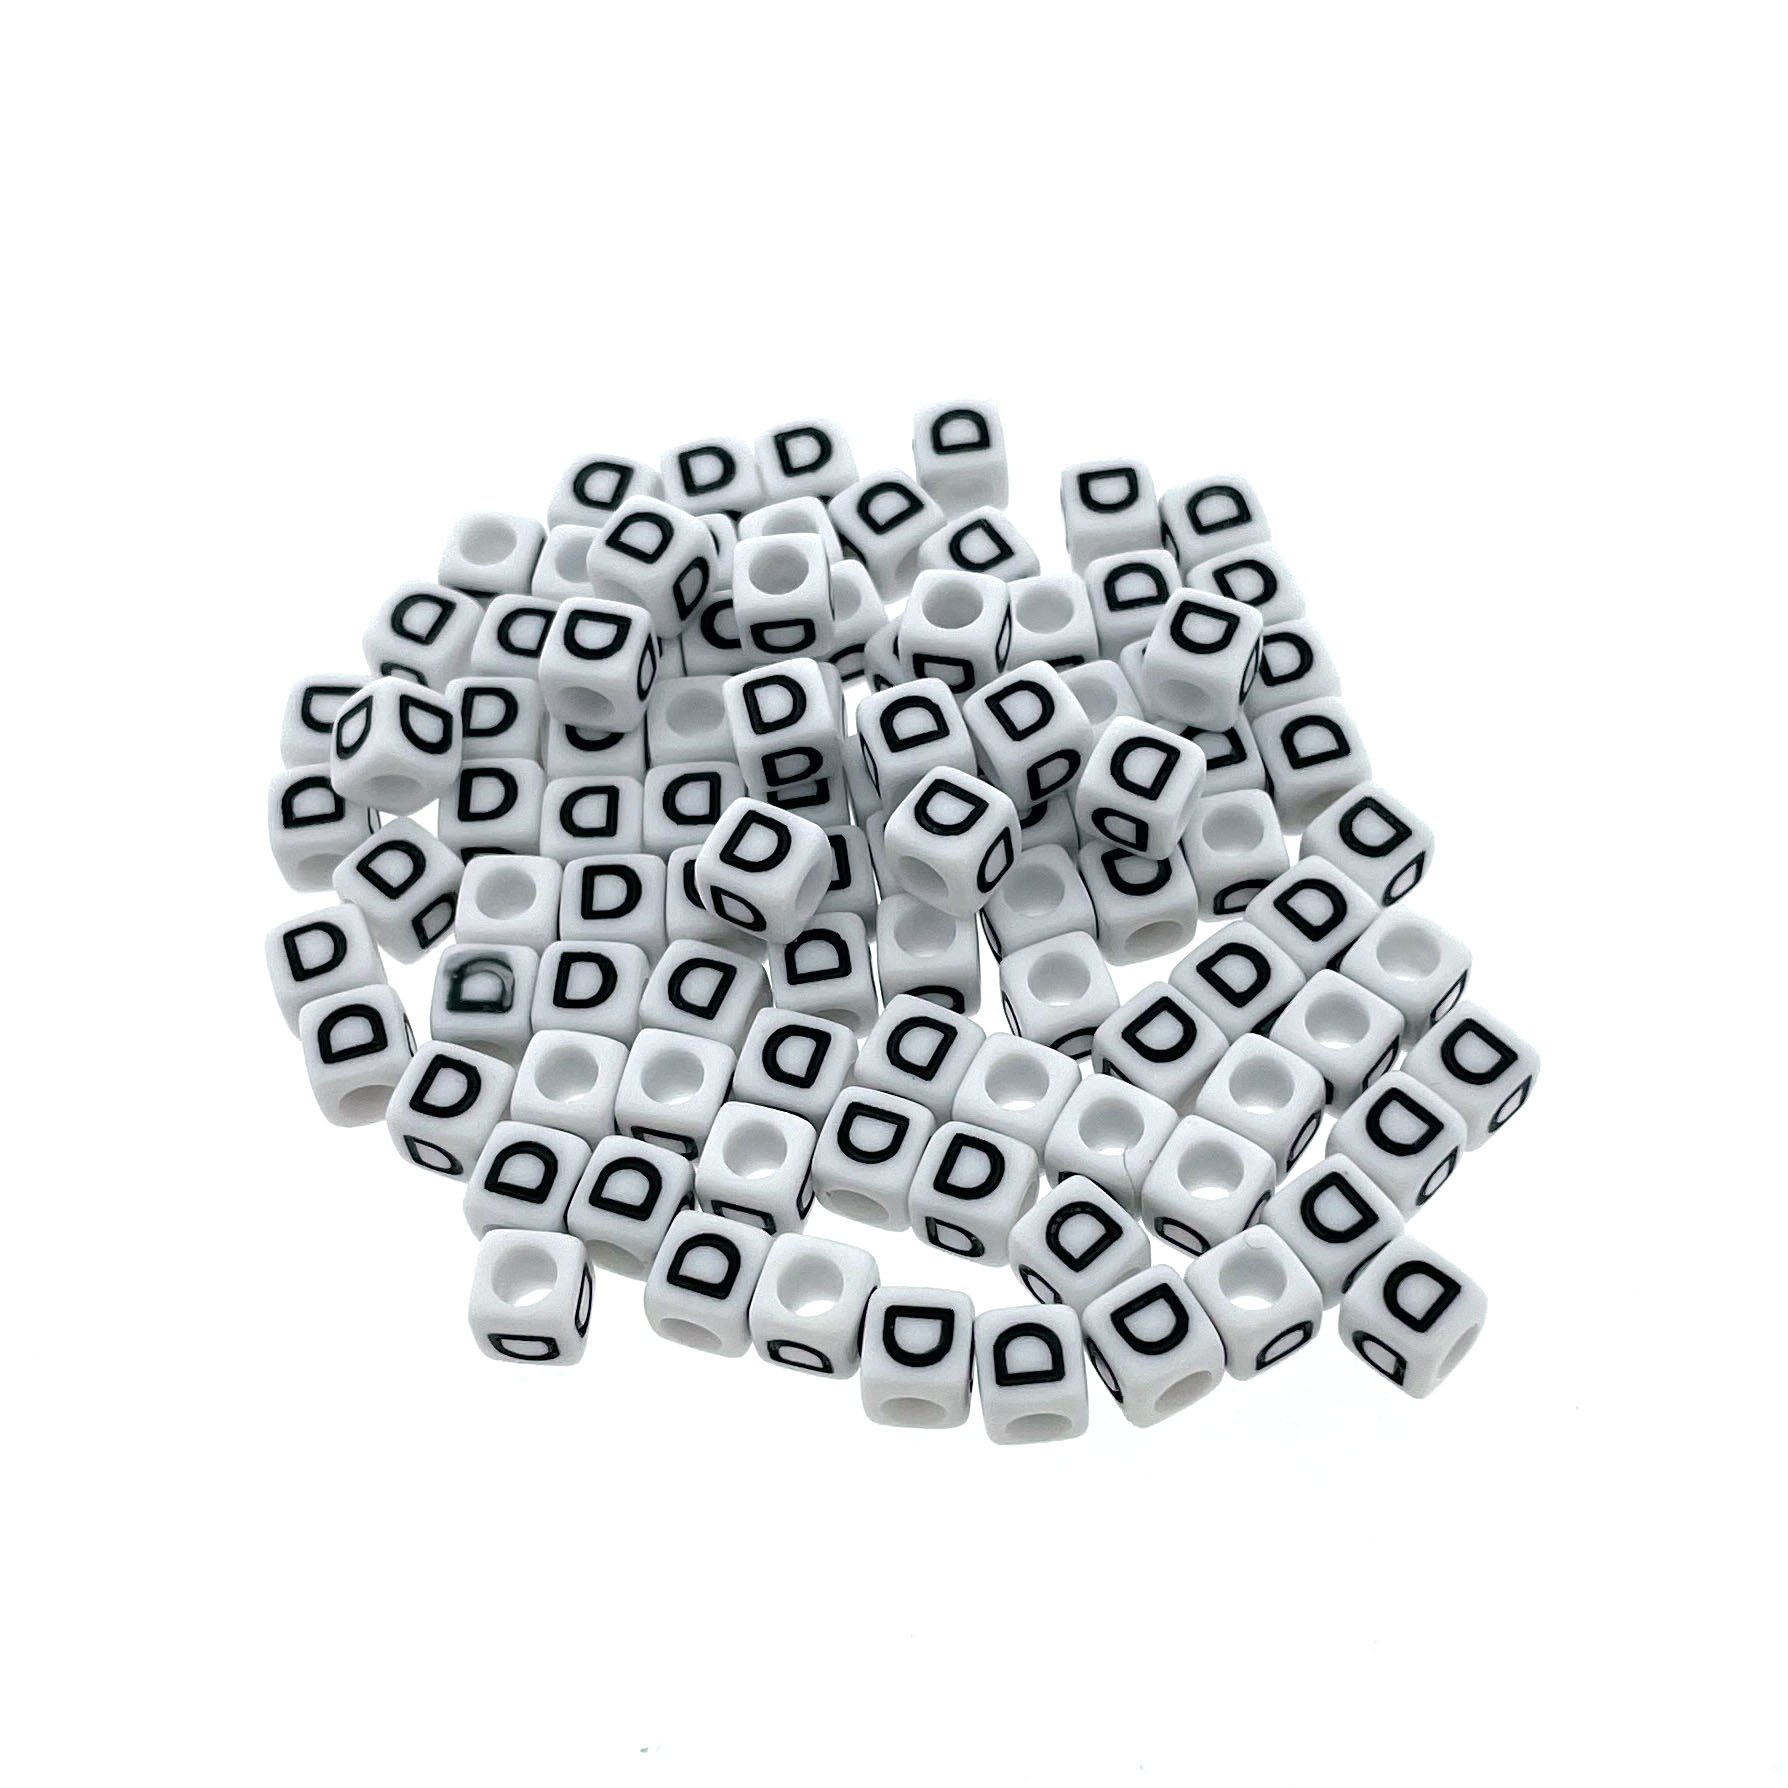 Buy Paracord alphabet letter beads White D at 123Paracord - 123Paracord